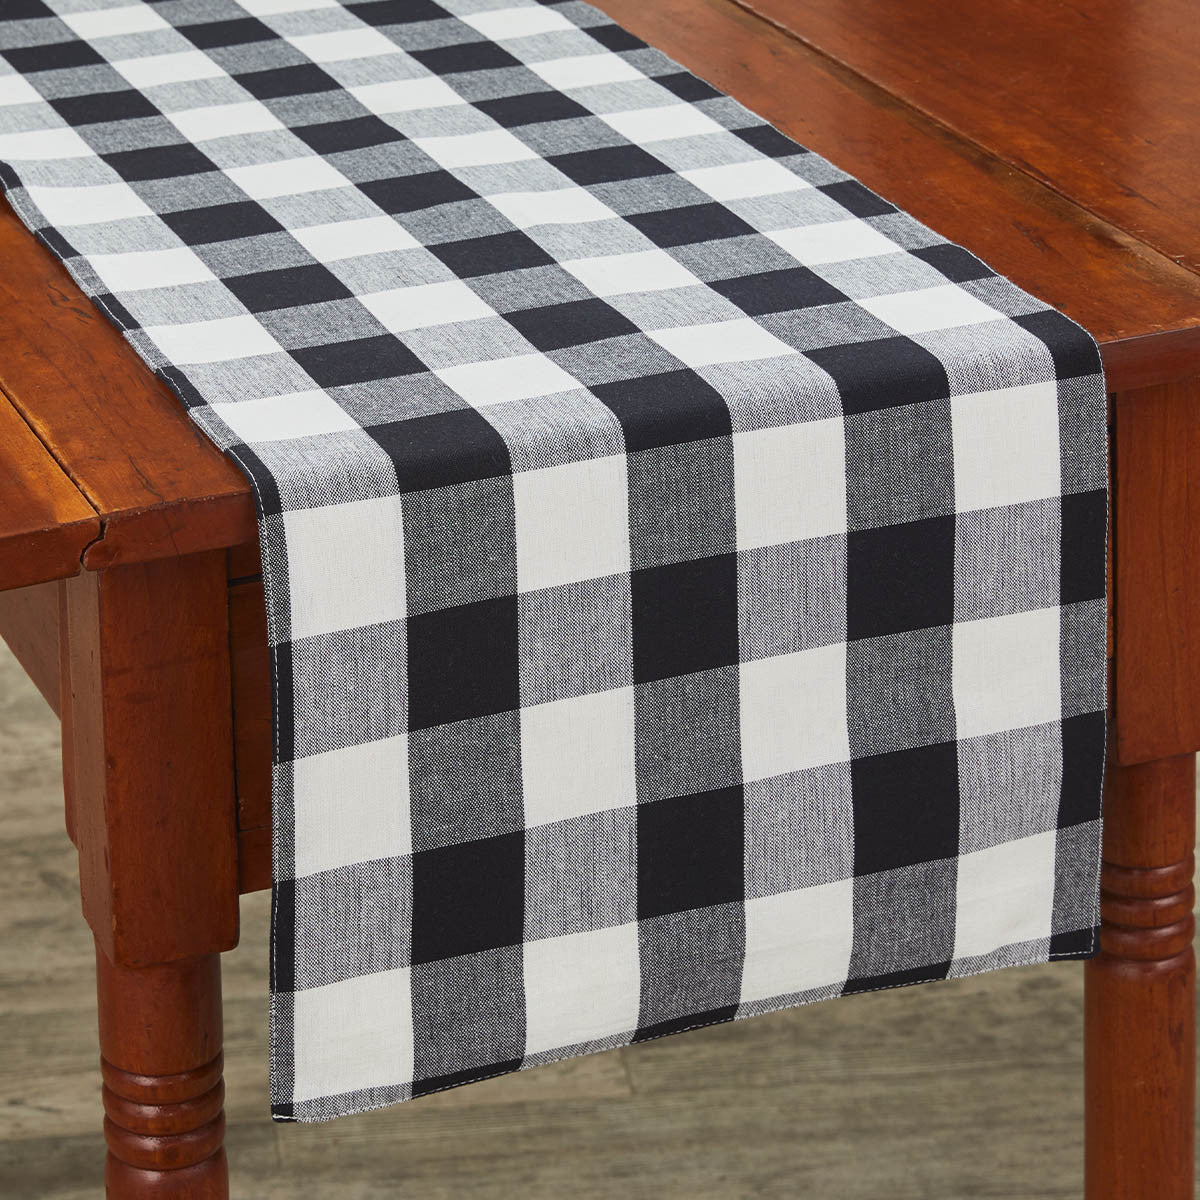 Wicklow Check Backed Table Runner 72"L - Black & Cream  Park Designs